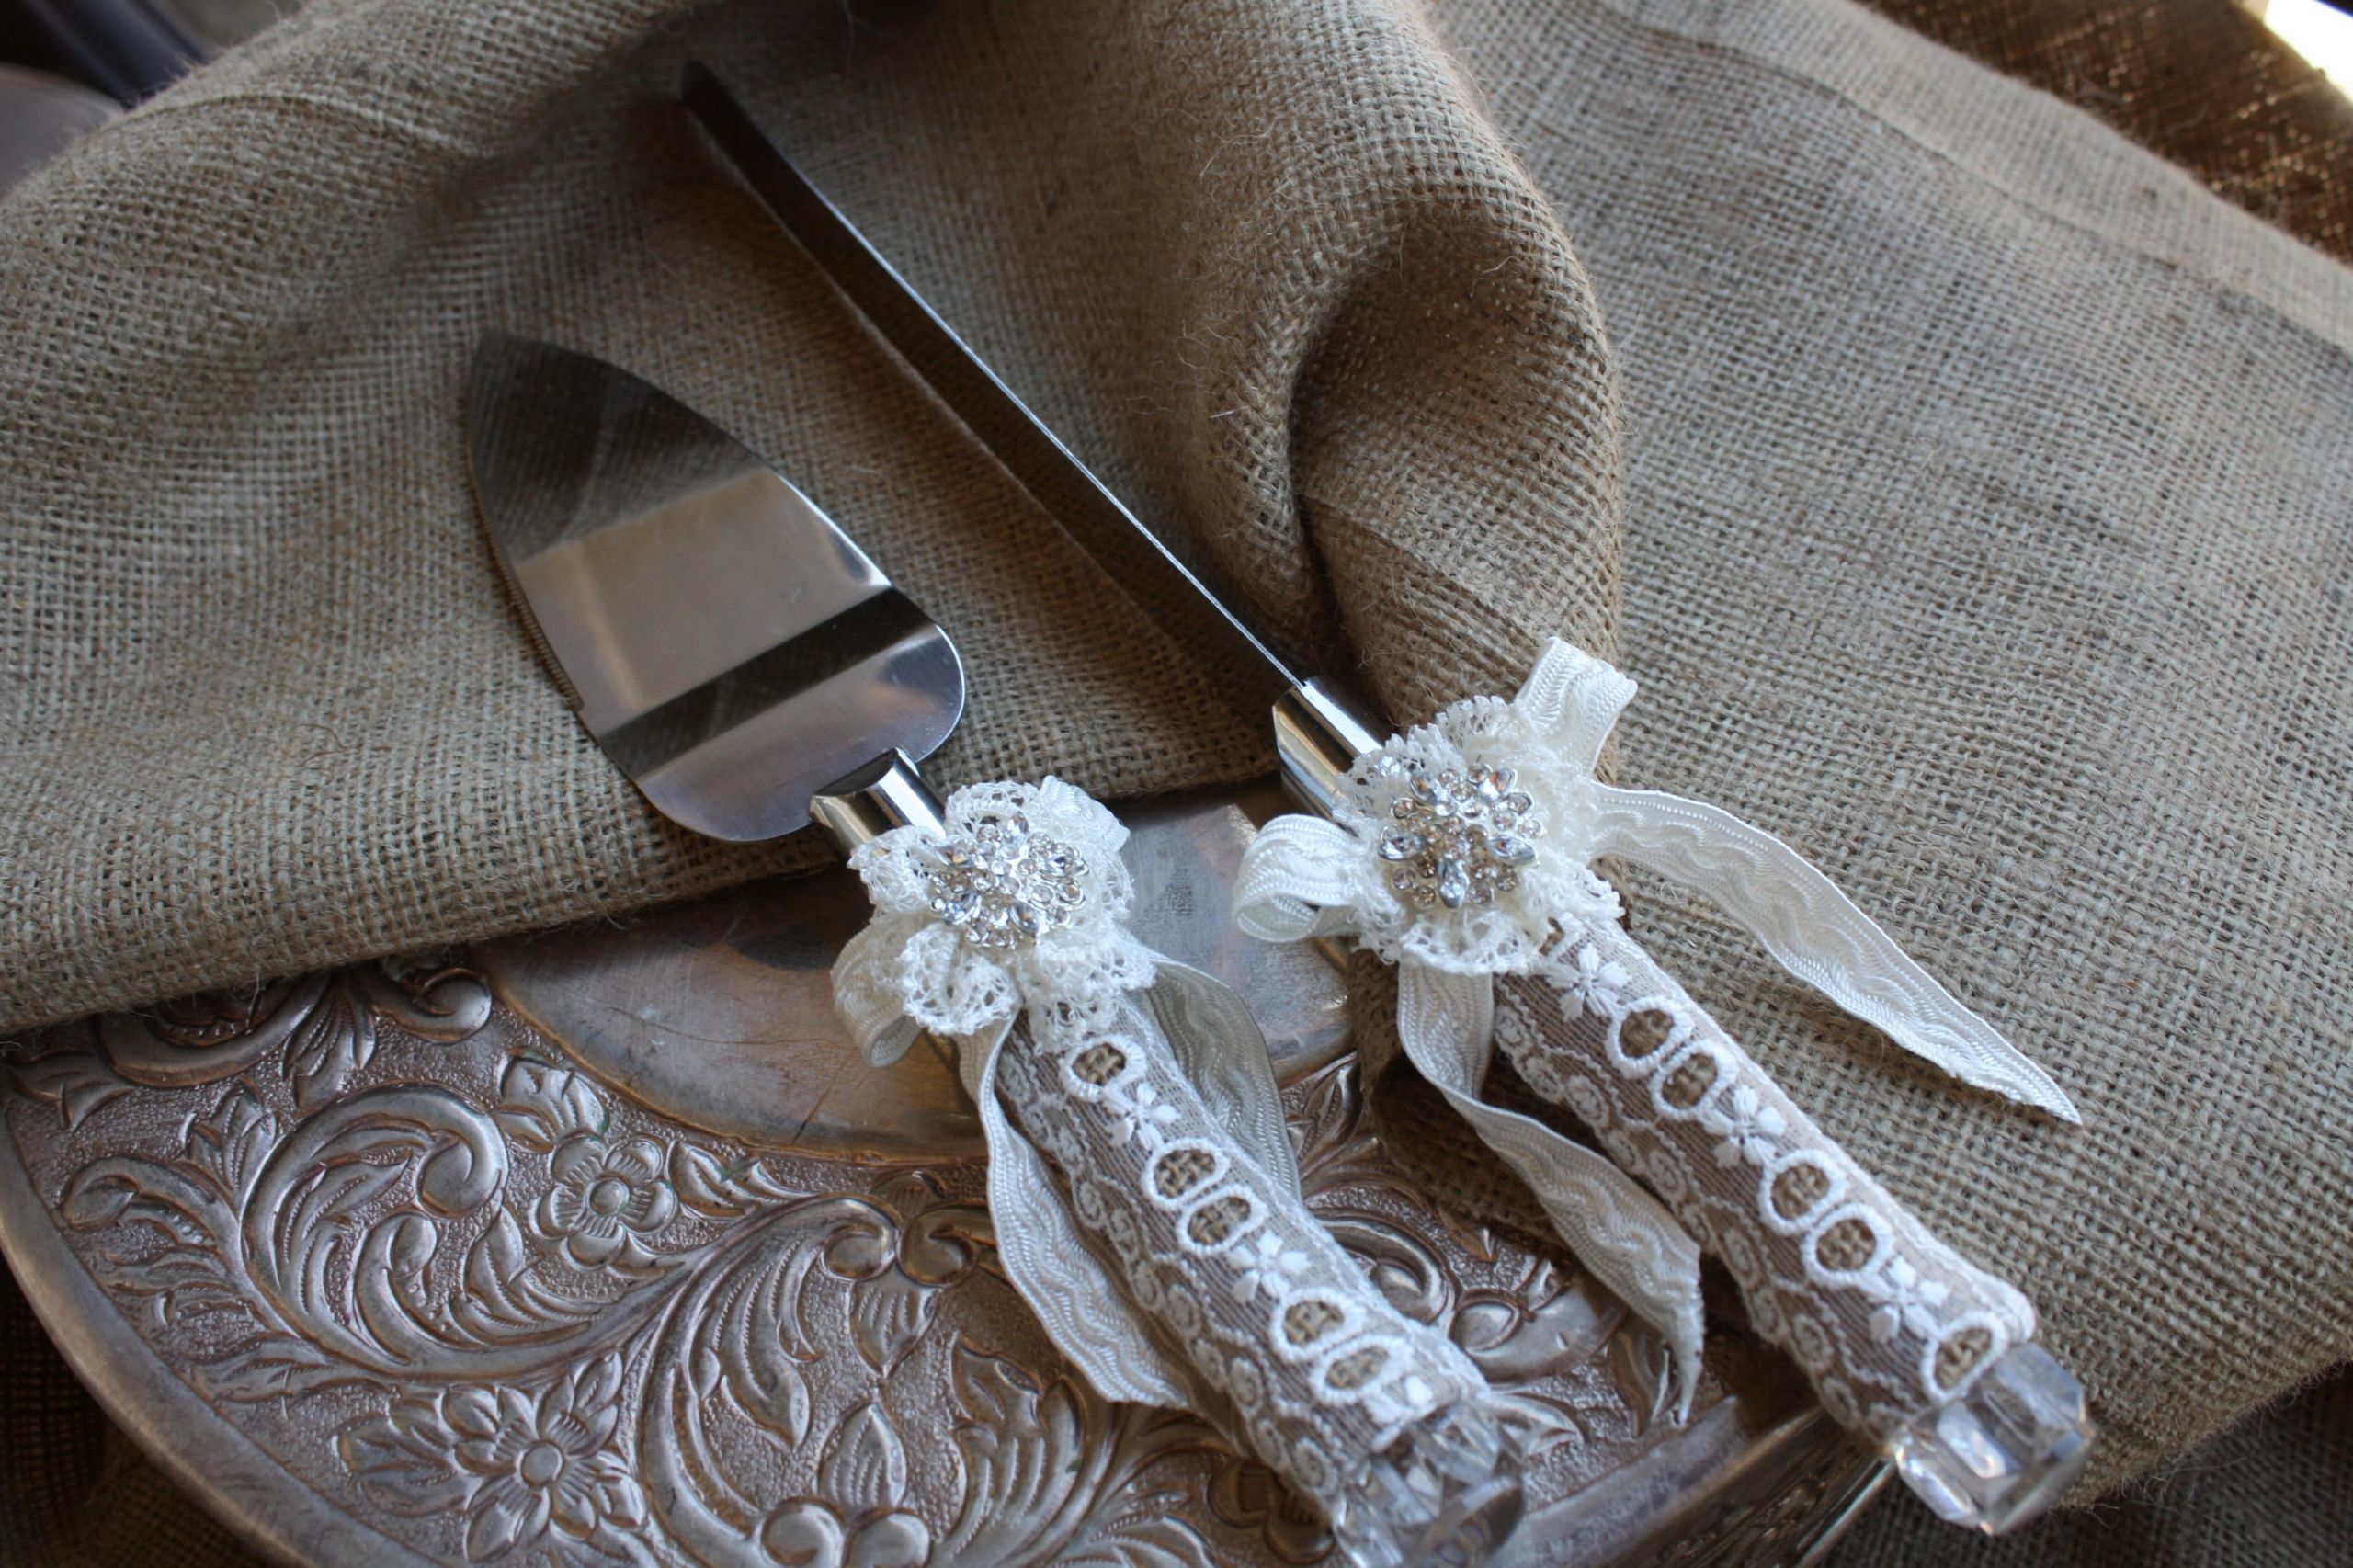 Wedding Cake Knife And Server Set
 Wedding Cake Server And Knife Set Country Rustic Chic